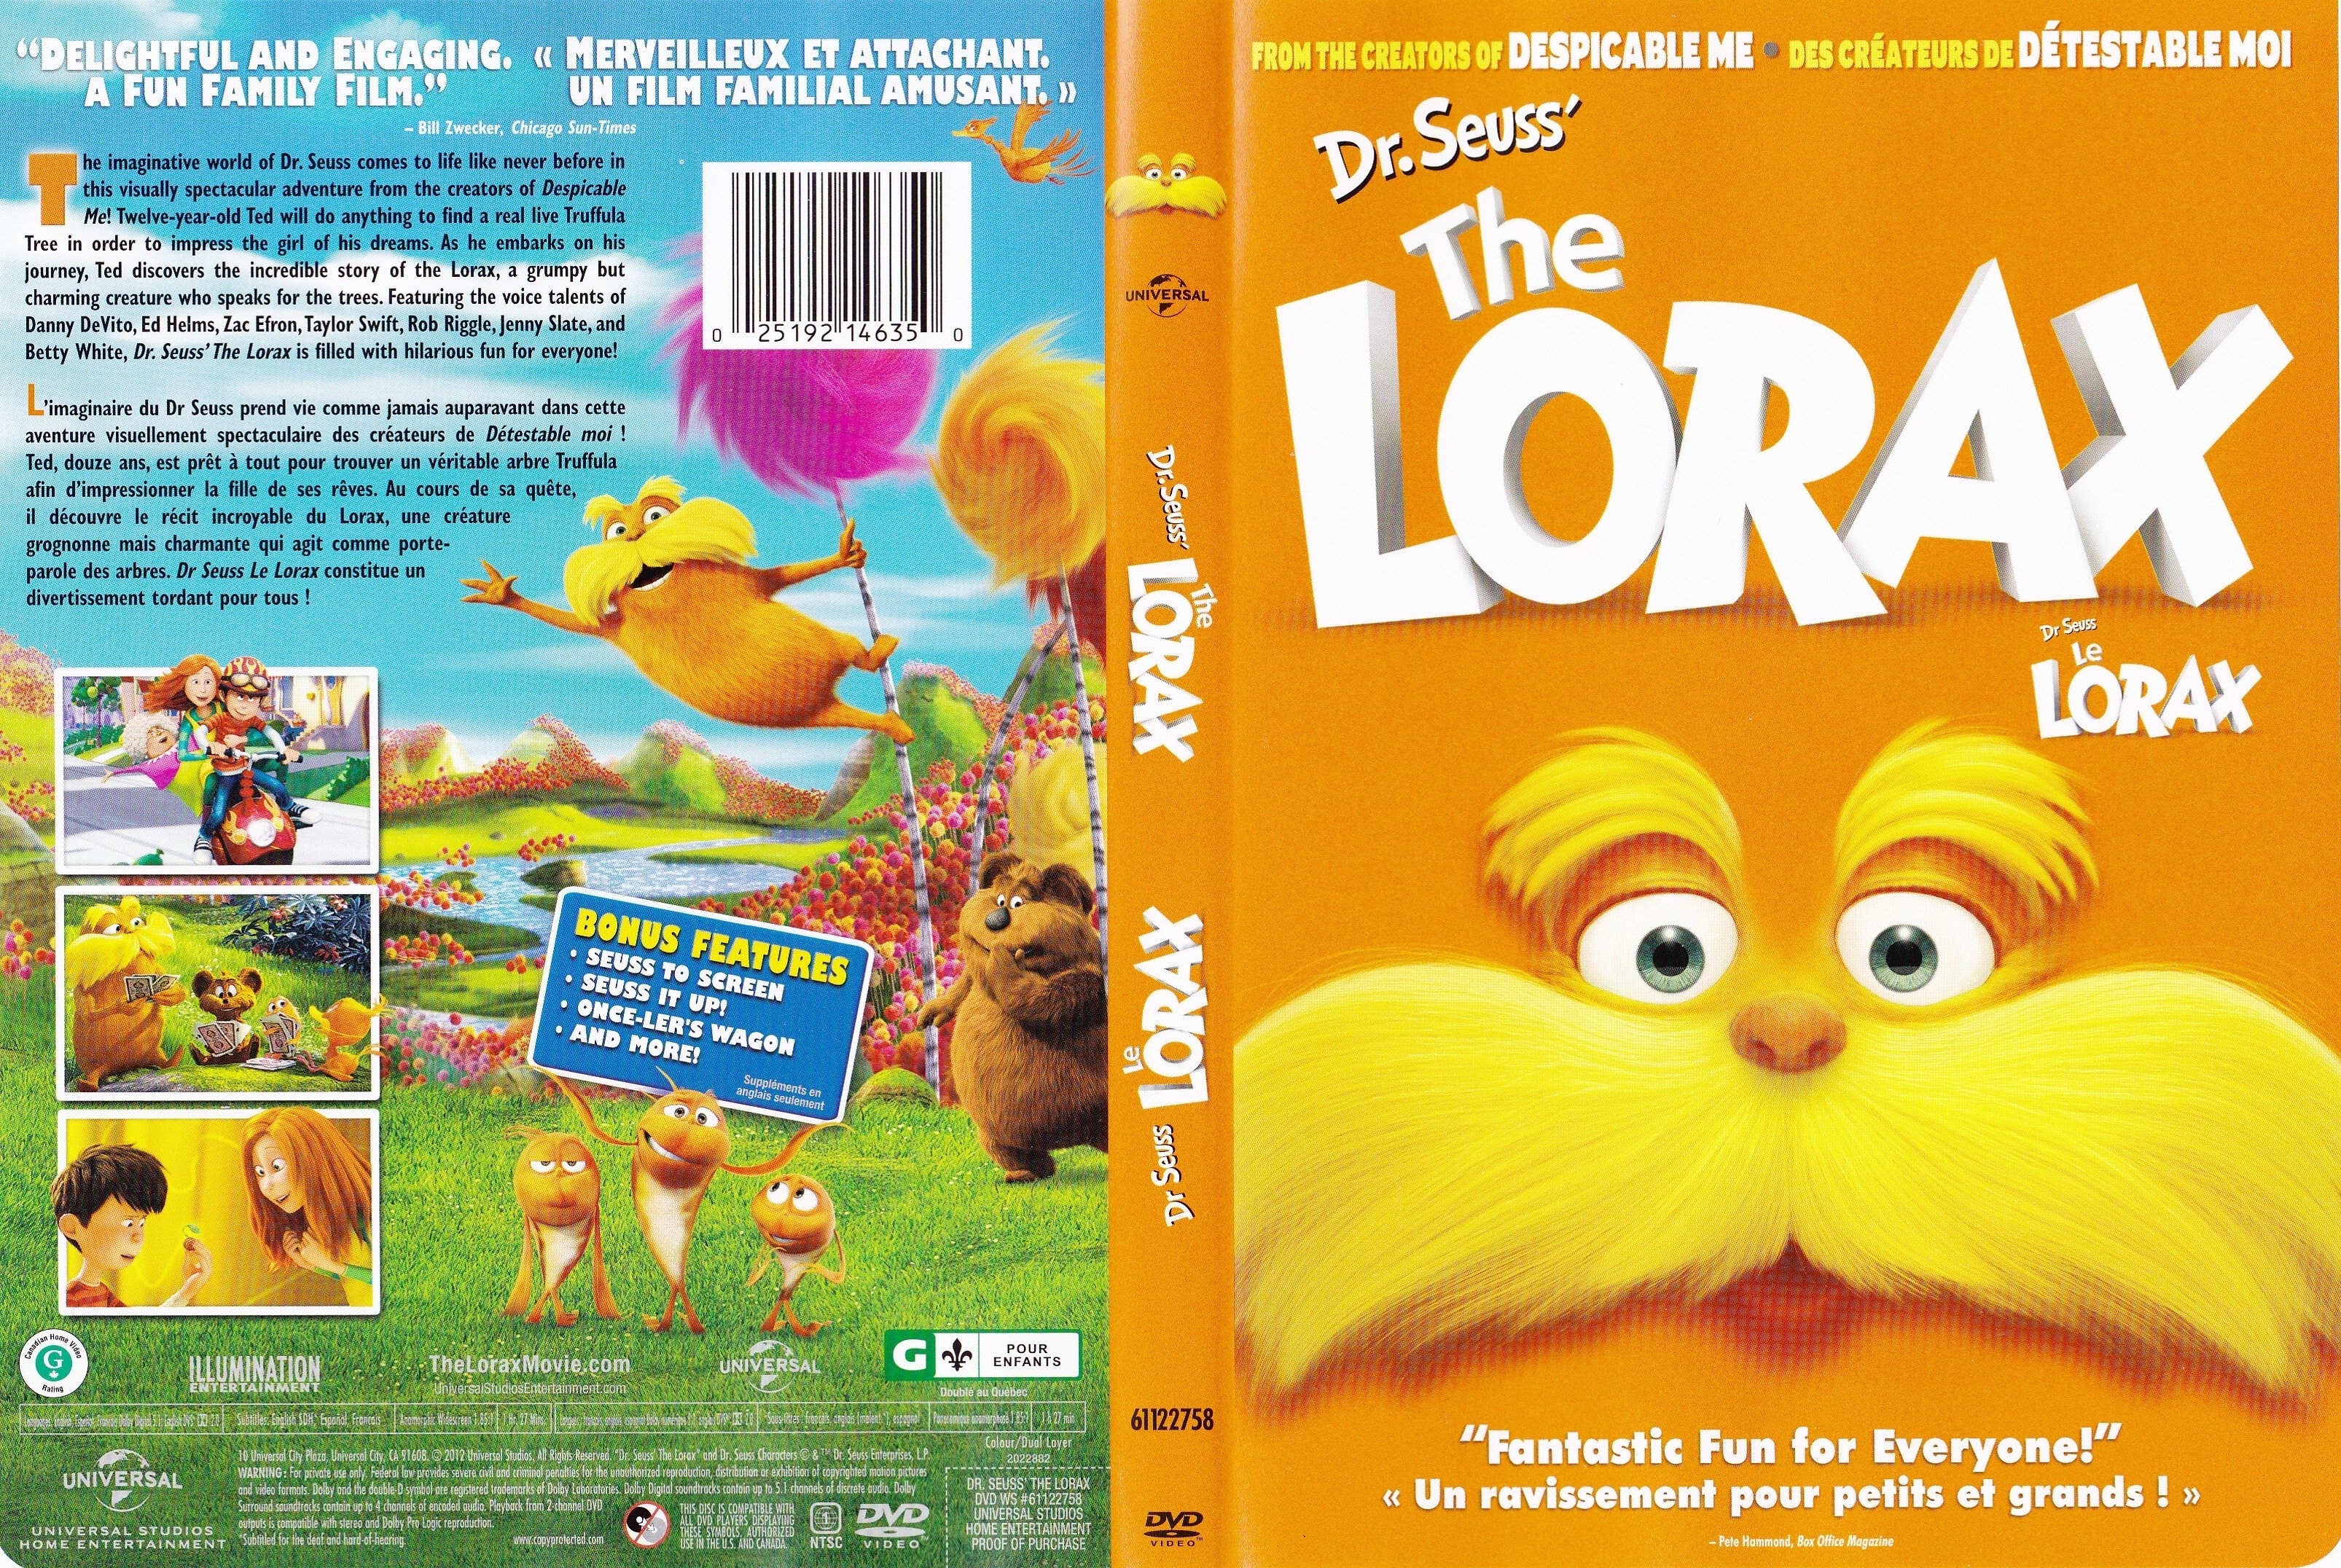 Jaquette DVD Le lorax - The lorax (Canadienne)